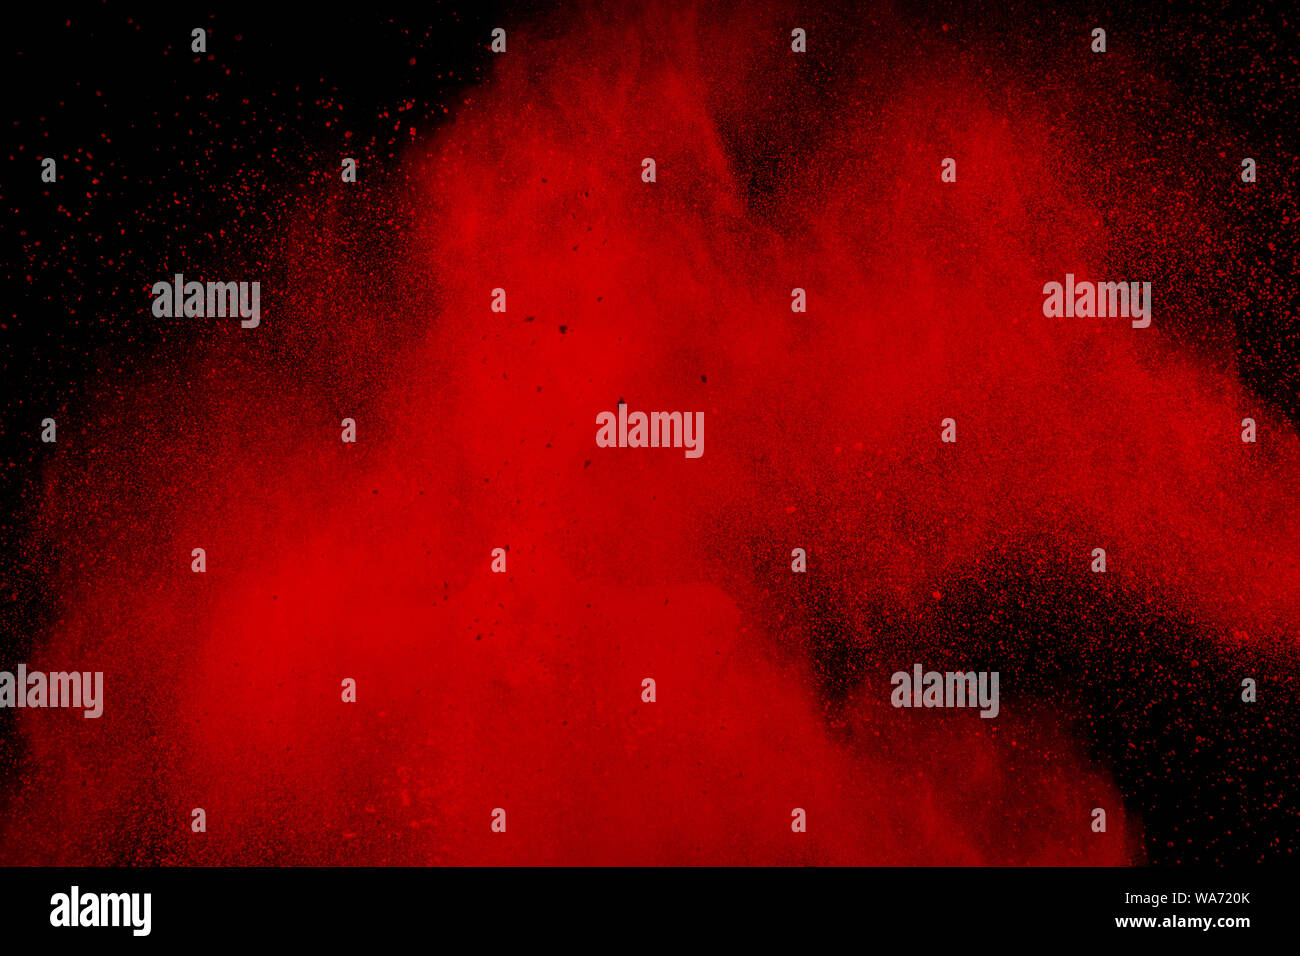 abstract red dust splattered on black background. Red powder explosion.Freeze motion of red particles splashing. Stock Photo